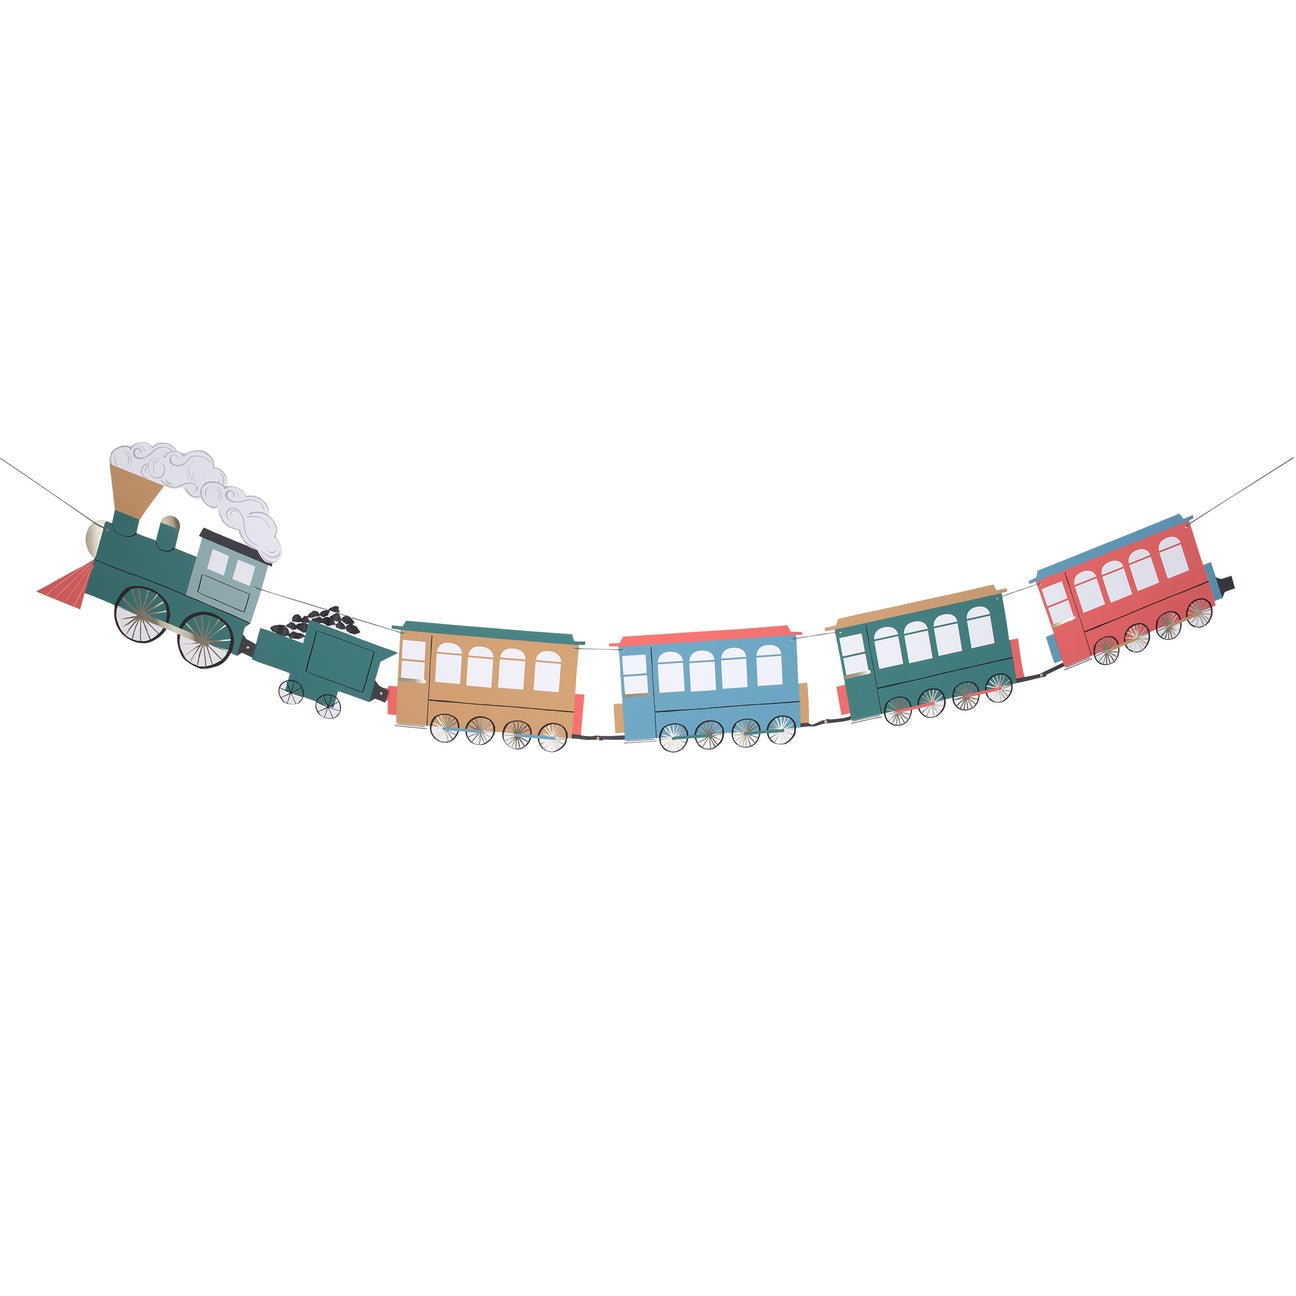 Train Garland - Oh My Darling Party Co-balloonsChoo choogarlands #Fringe_Backdrop#